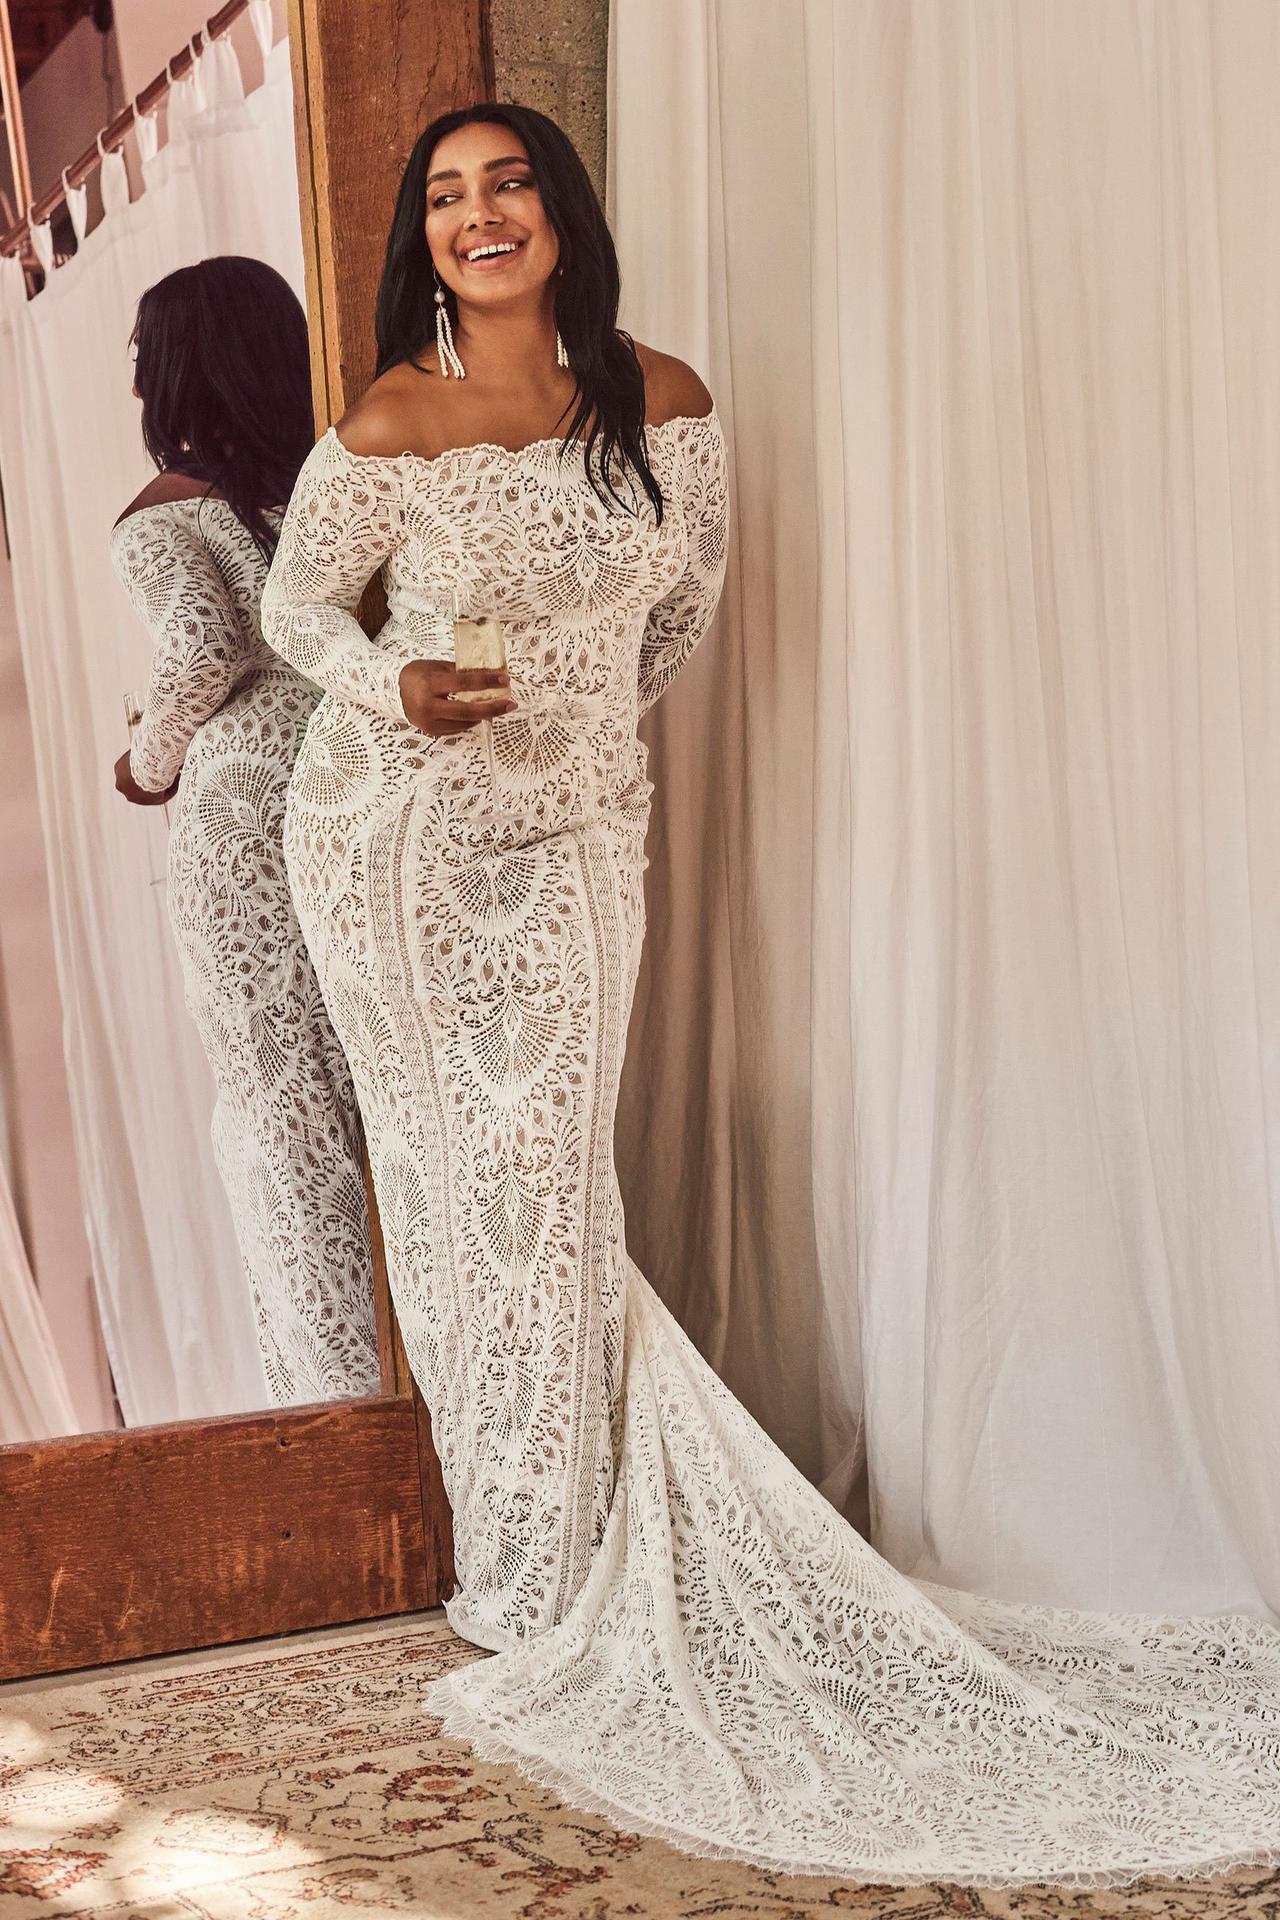 Model wearing an off the shoulder lace long sleeved wedding dress